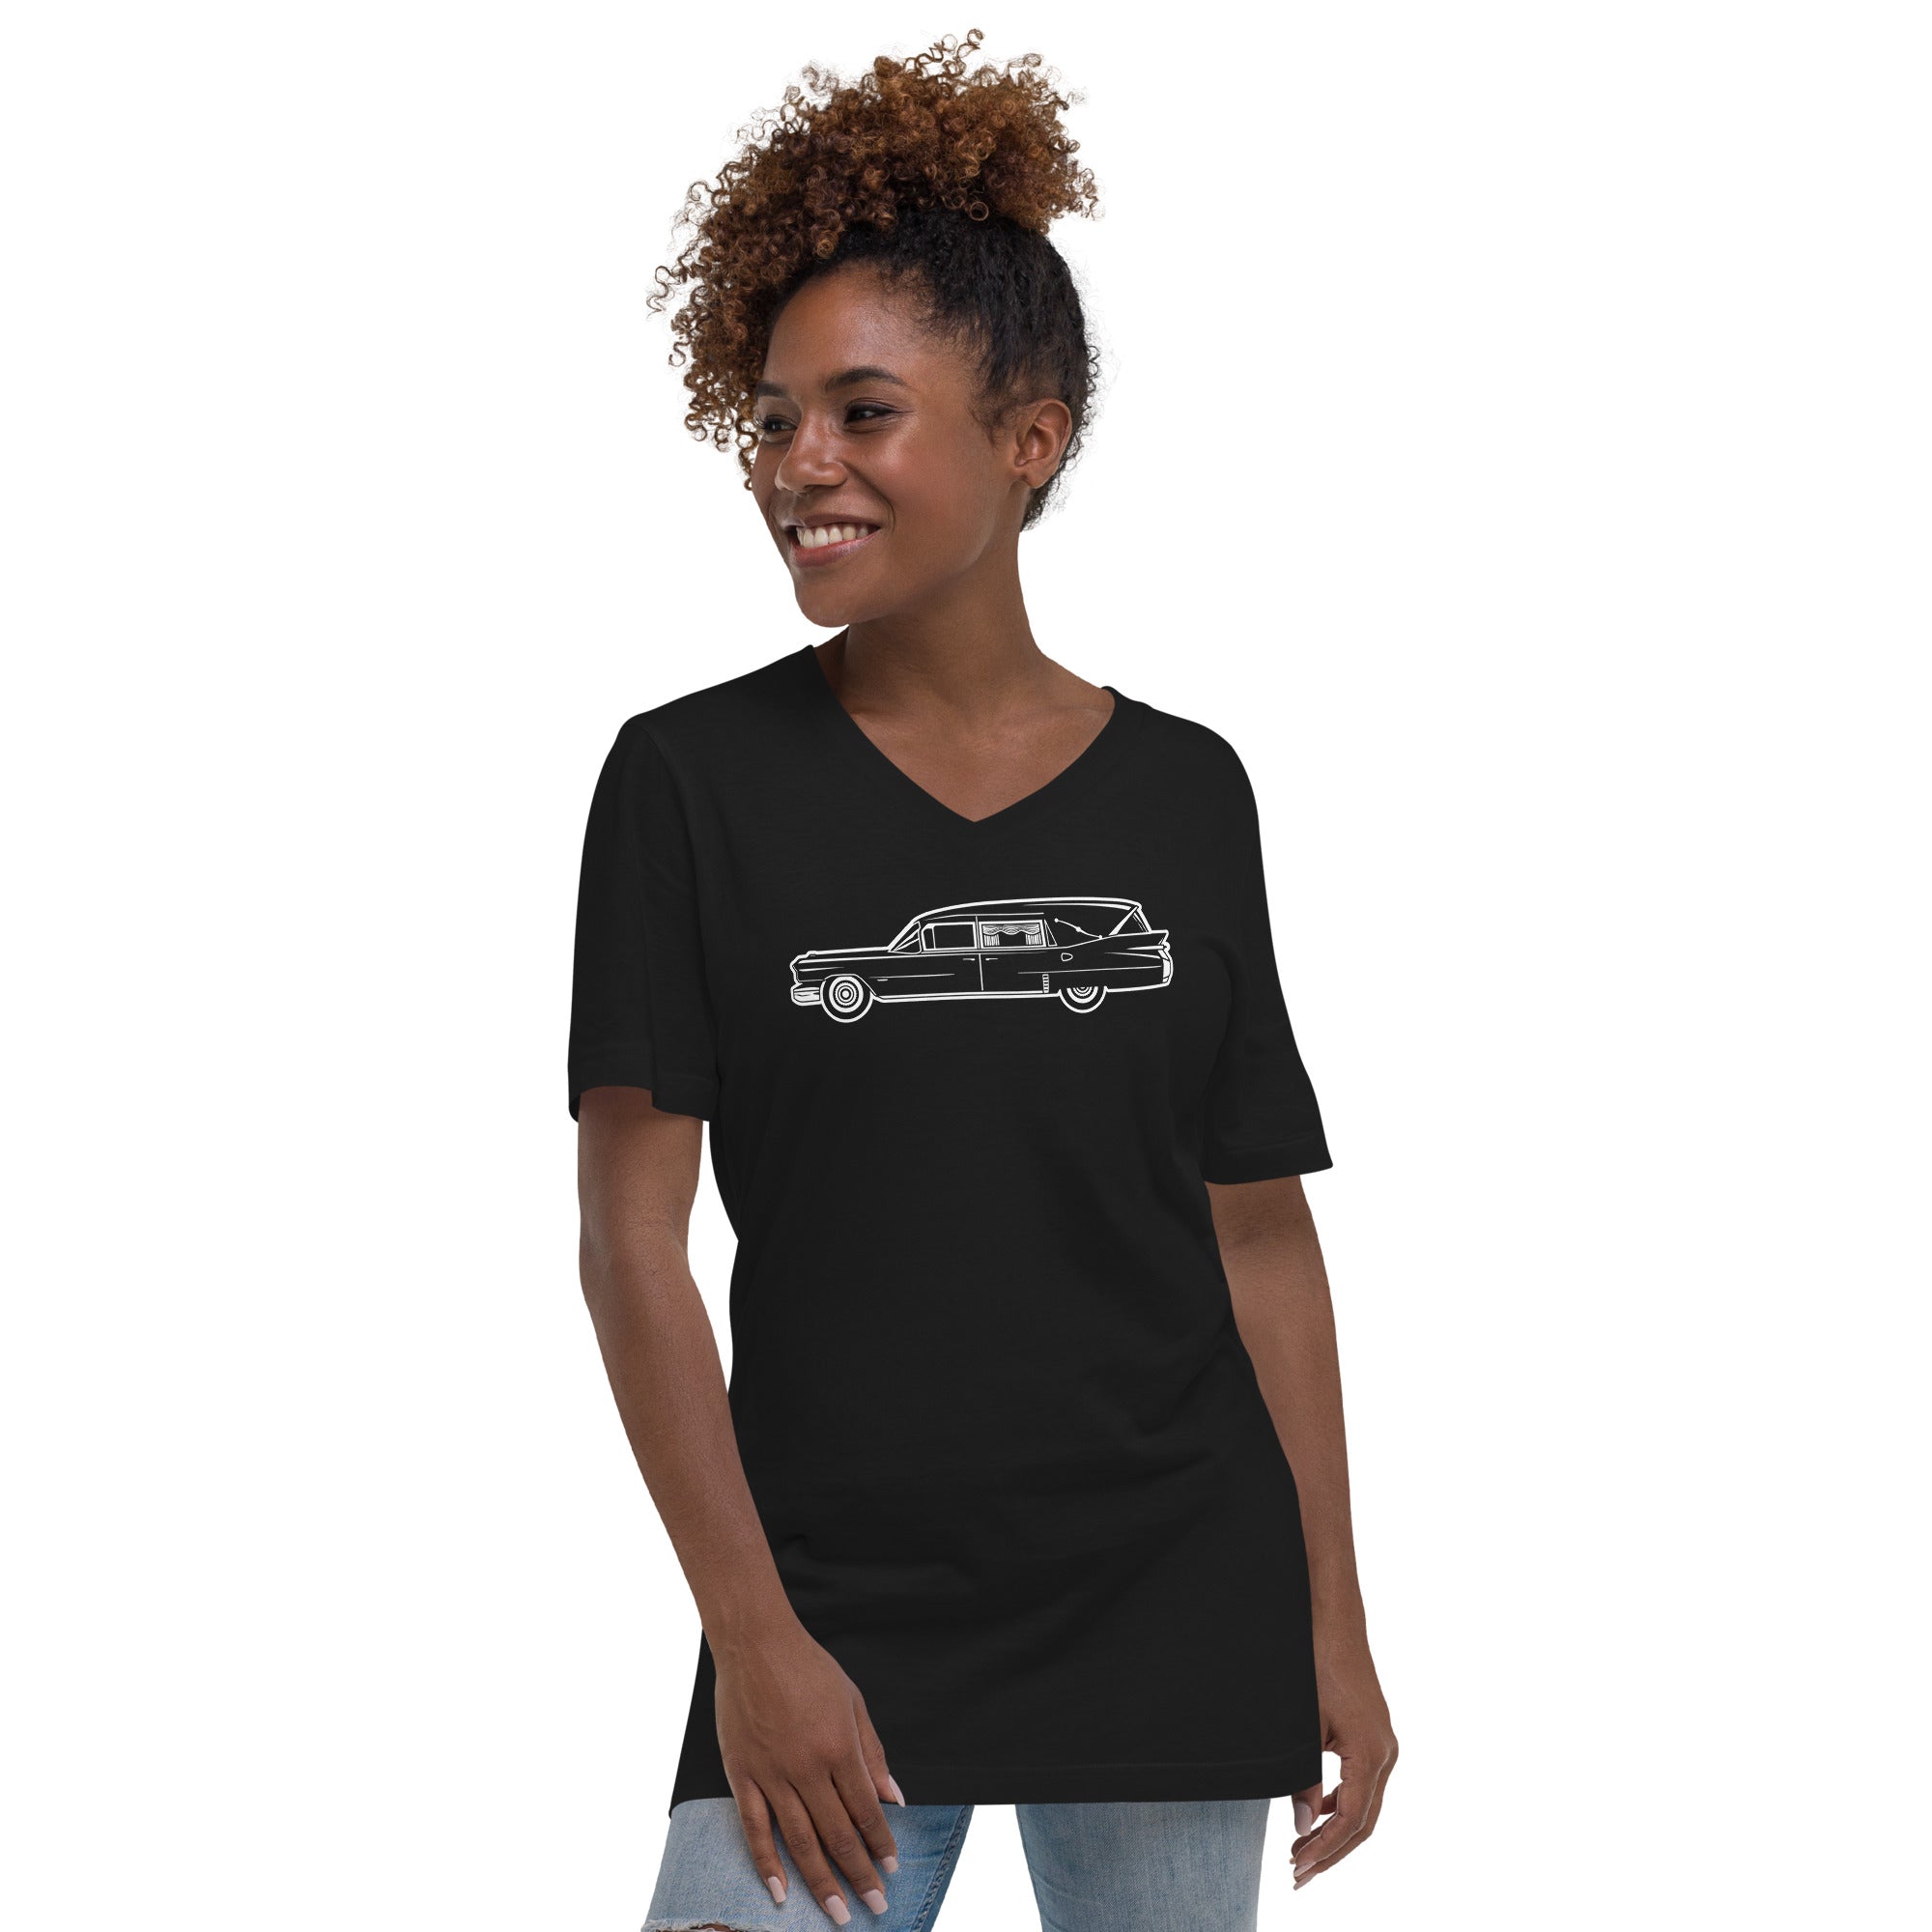 Classic Funeral Hearse Car Gothic Halloween Ride Women’s Short Sleeve V-Neck T-Shirt